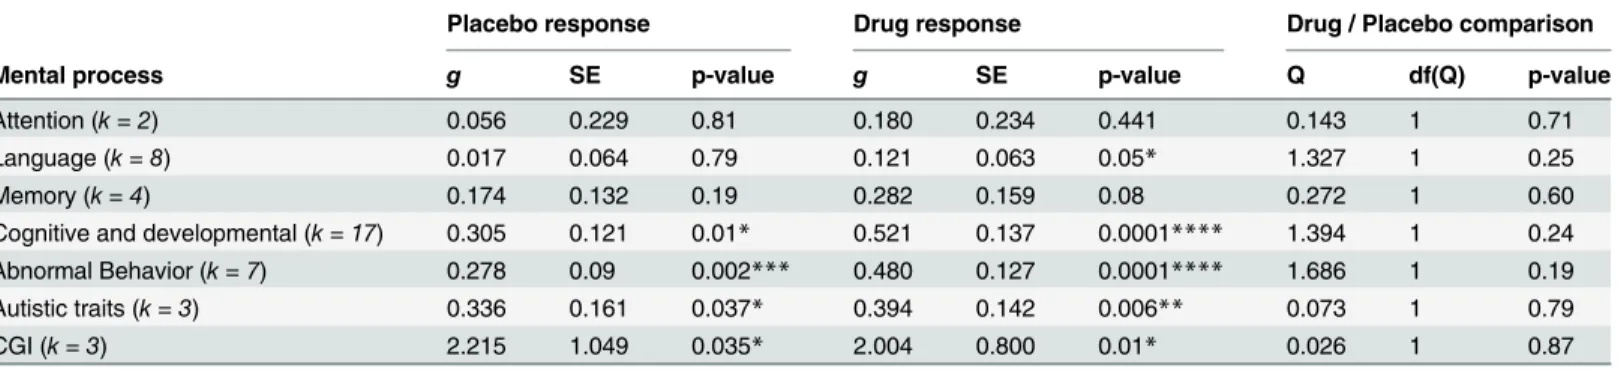 Table 2. Placebo and drug responses by mental process categories. The total number of scales used for assessment of treatment outcomes were grouped into 7 different mental process categories, or domains